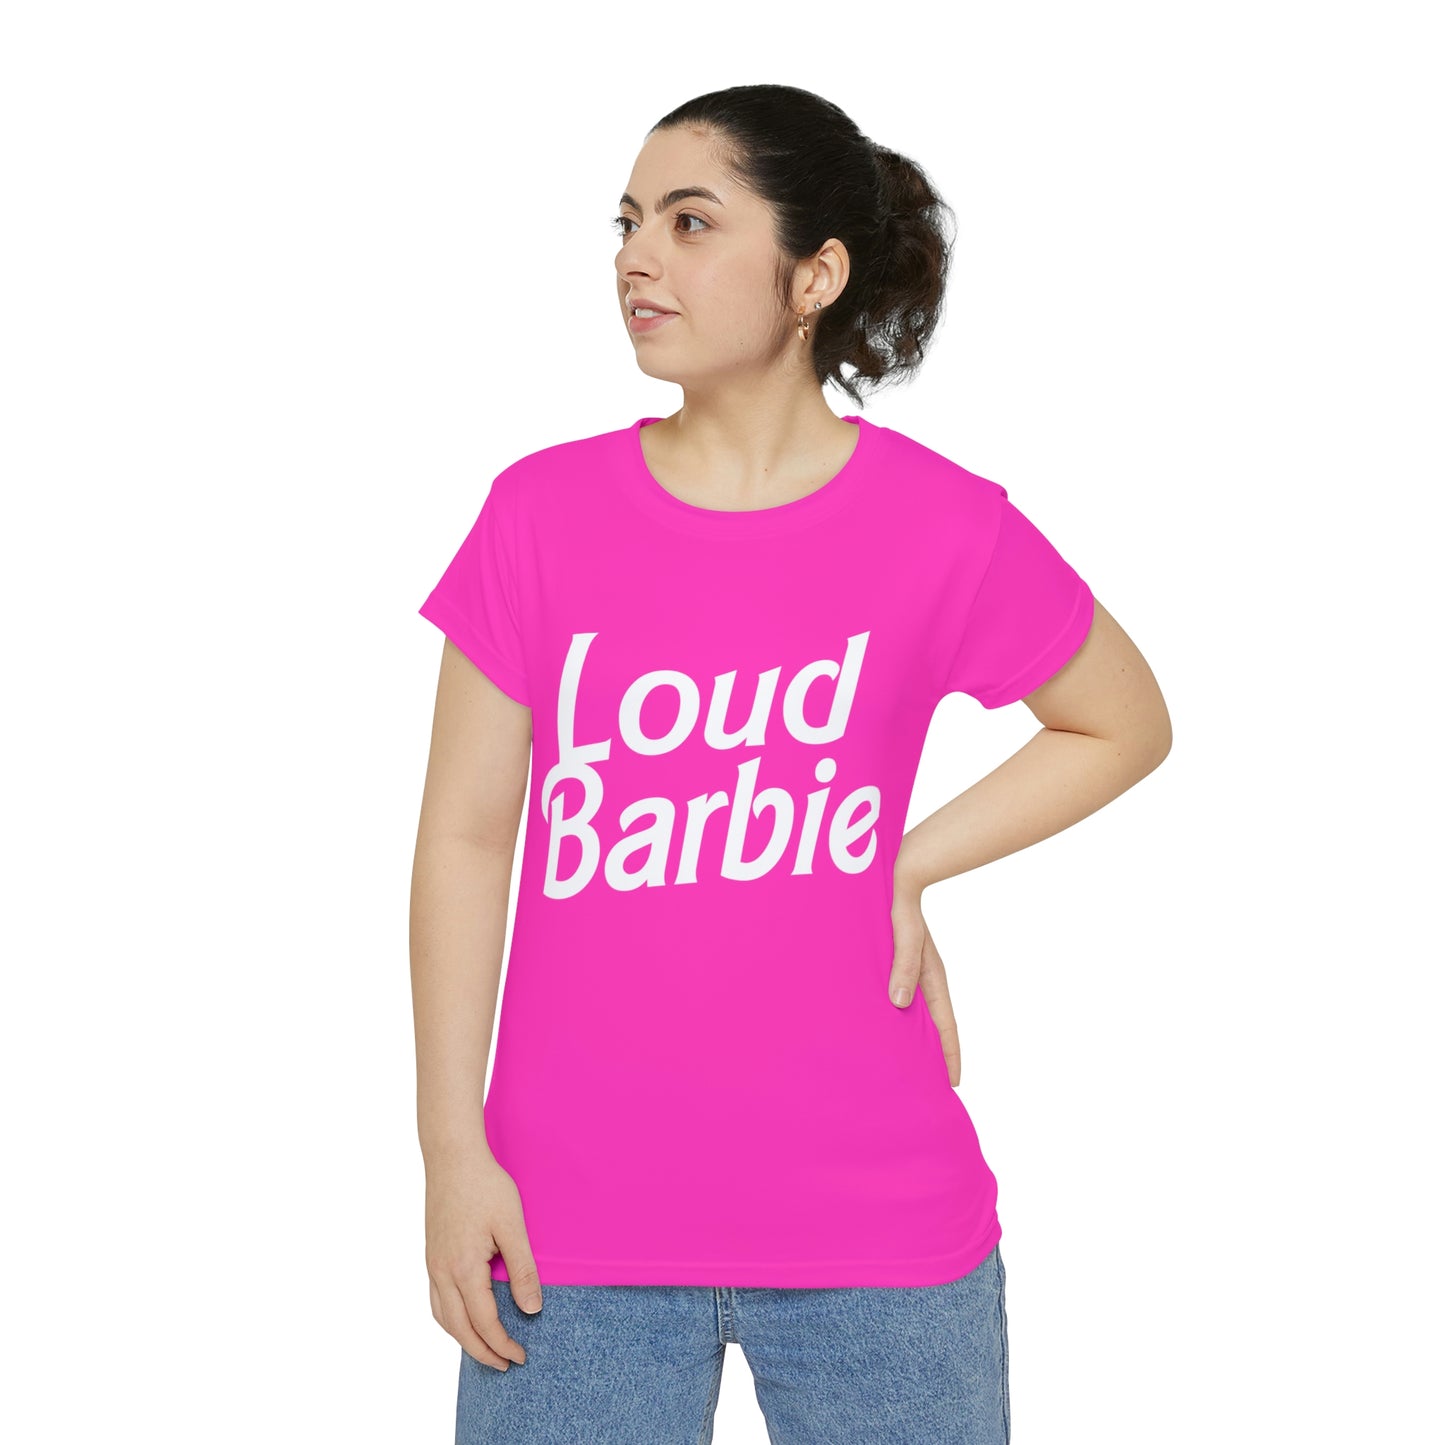 Loud Barbie, Bachelorette Party Shirts, Bridesmaid Gifts, Here comes the Party Tees, Group Party Favor Shirts, Bridal Party Shirt for women